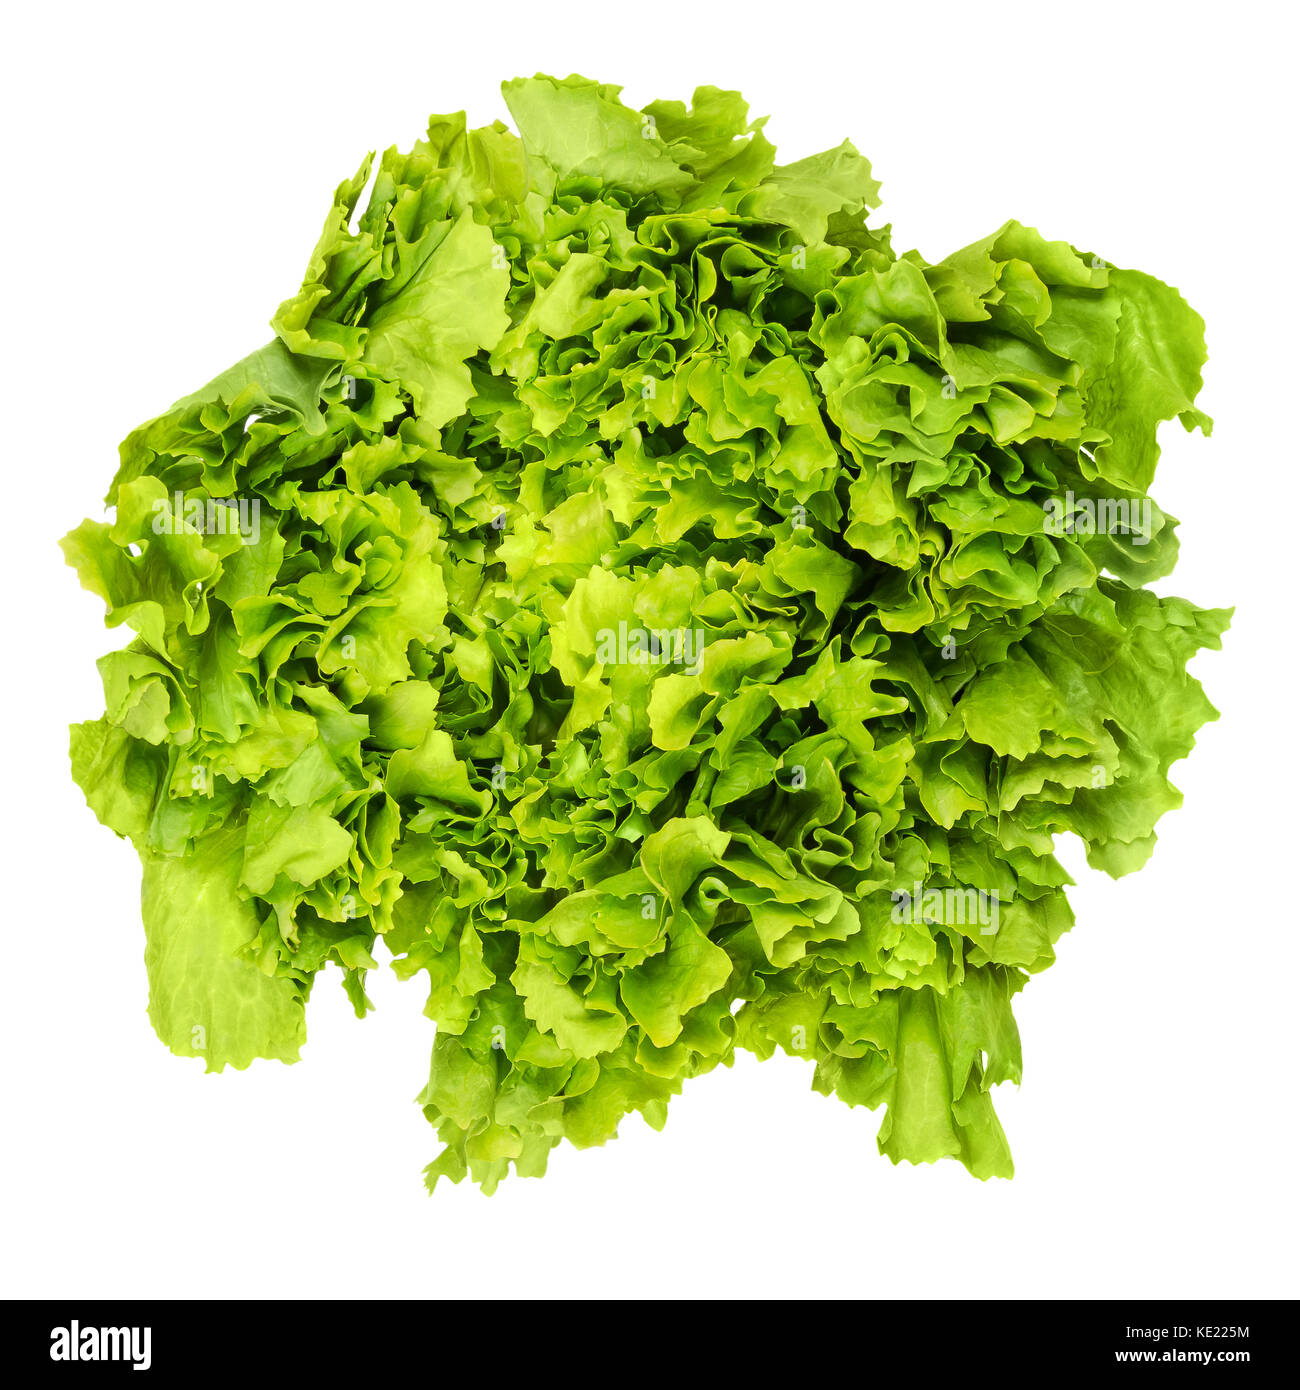 Escarole endive from above over white. Leaf vegetable and lettuce with broad, bitter leaves. Cichorium endivia var latifolia. Green salad head. Stock Photo